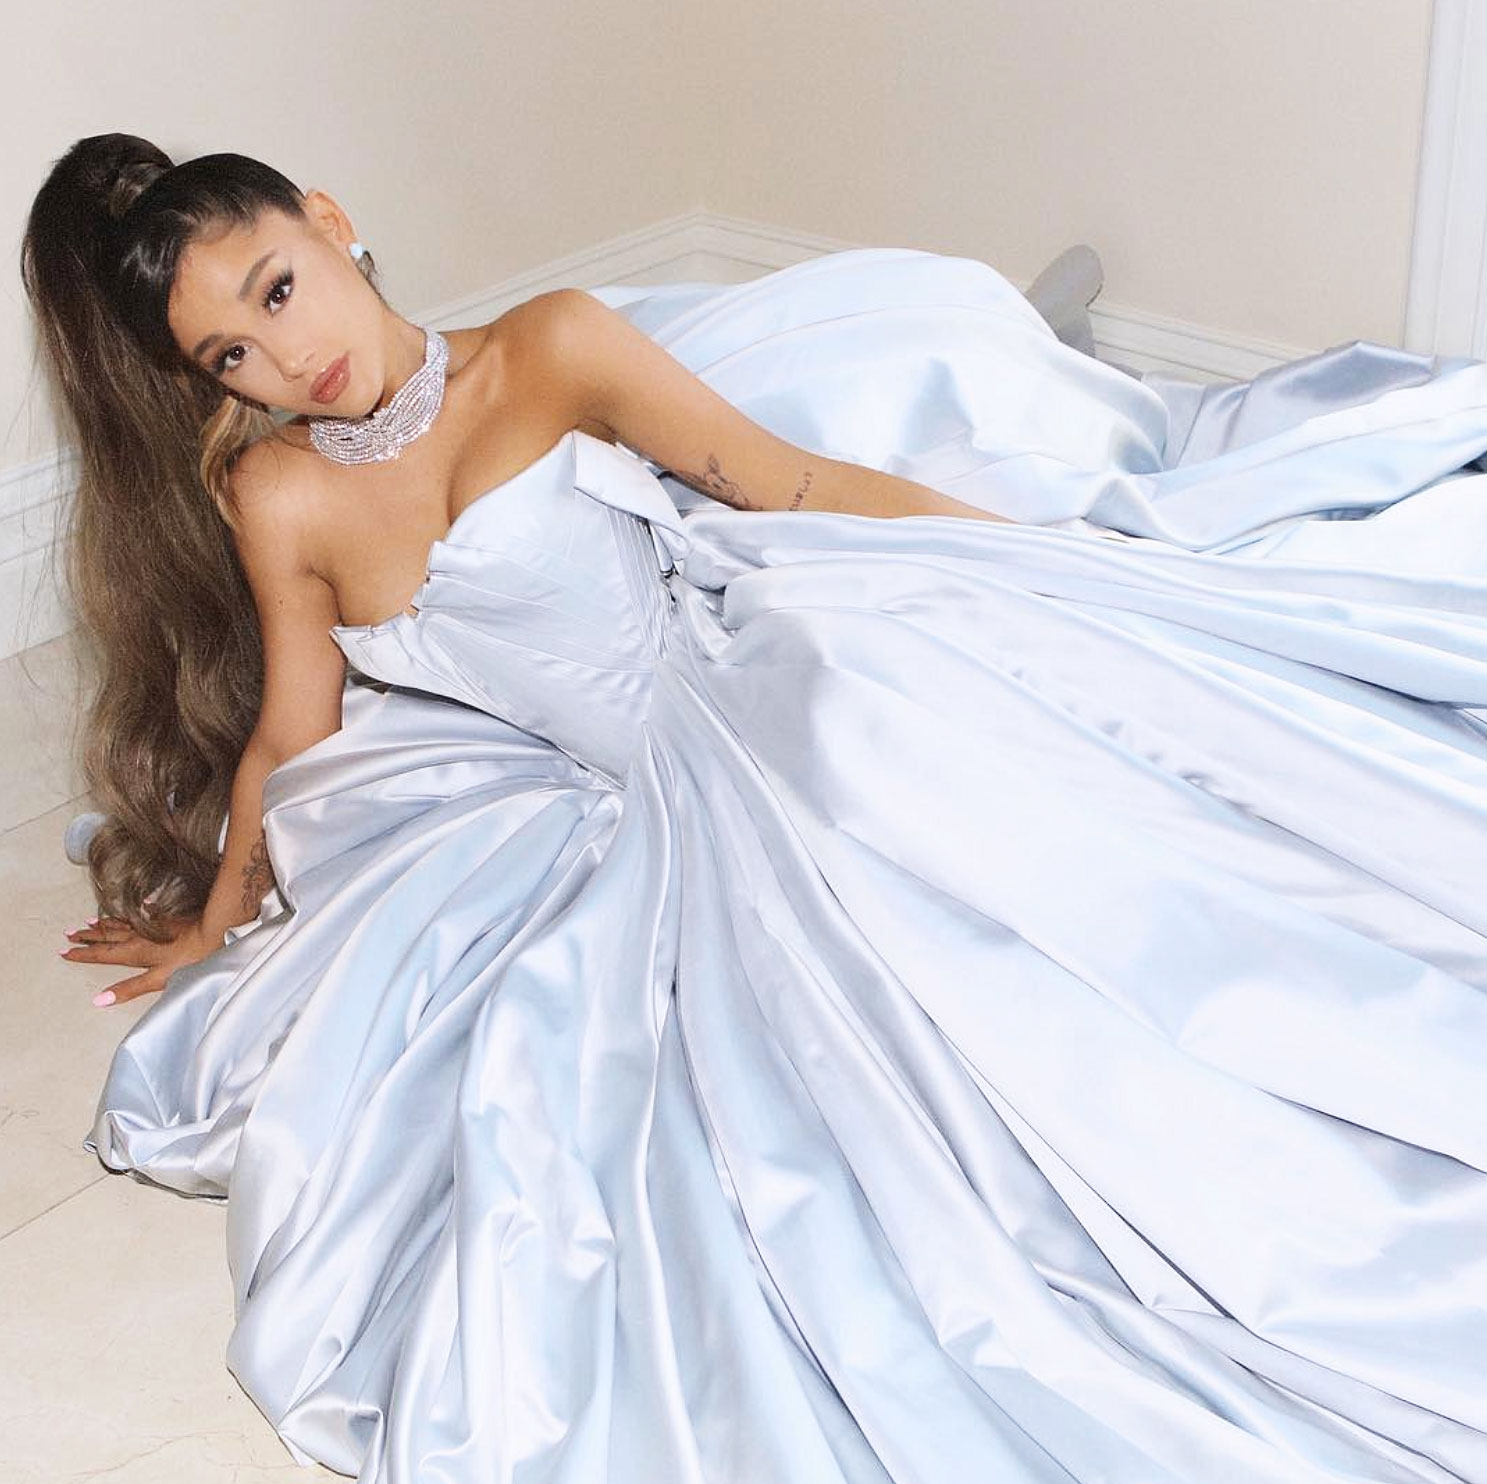 Grammys 2019: Ariana Grande Lounges at Home in Custom Dress